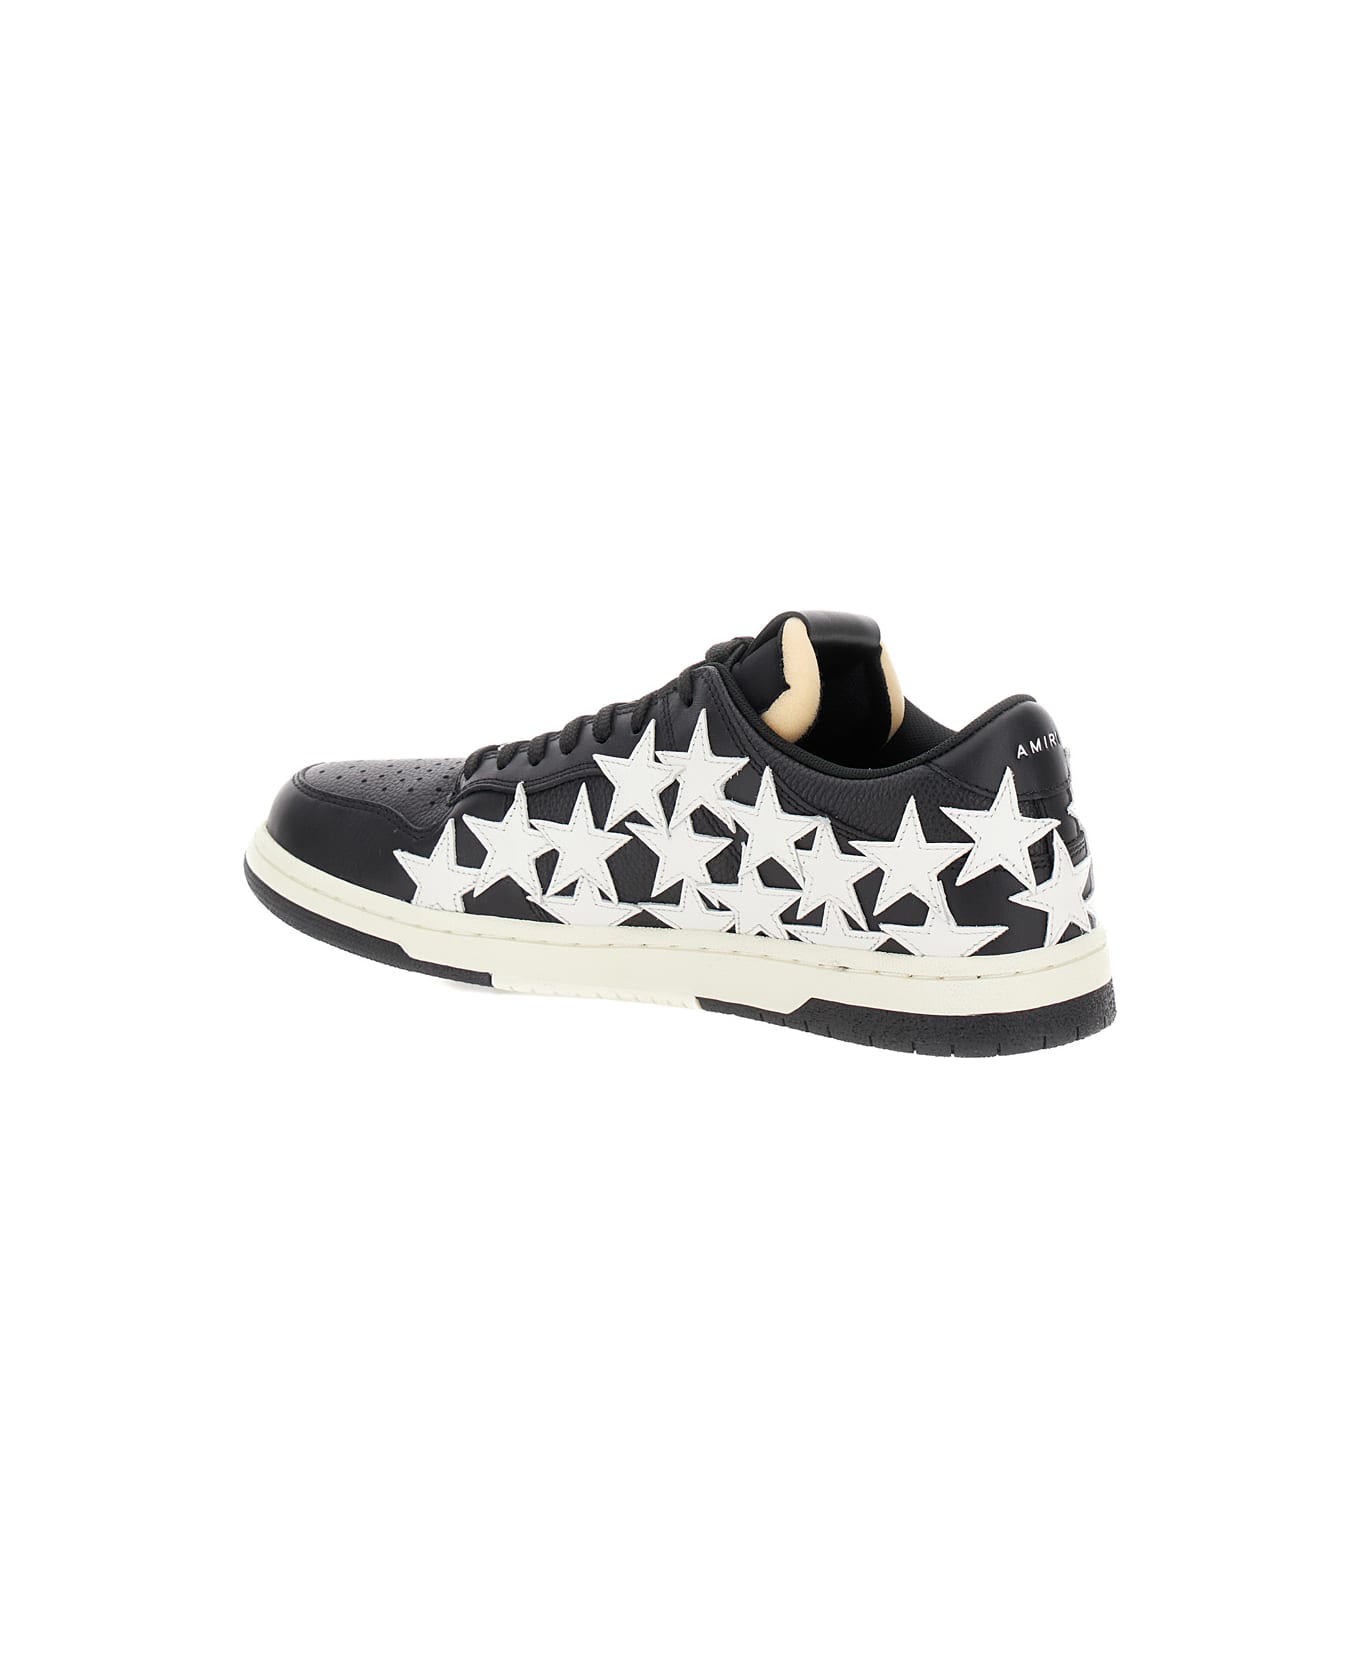 AMIRI 'stars Court' Black And White Low Top Sneakers With Star Patches In Leather Man - Black スニーカー